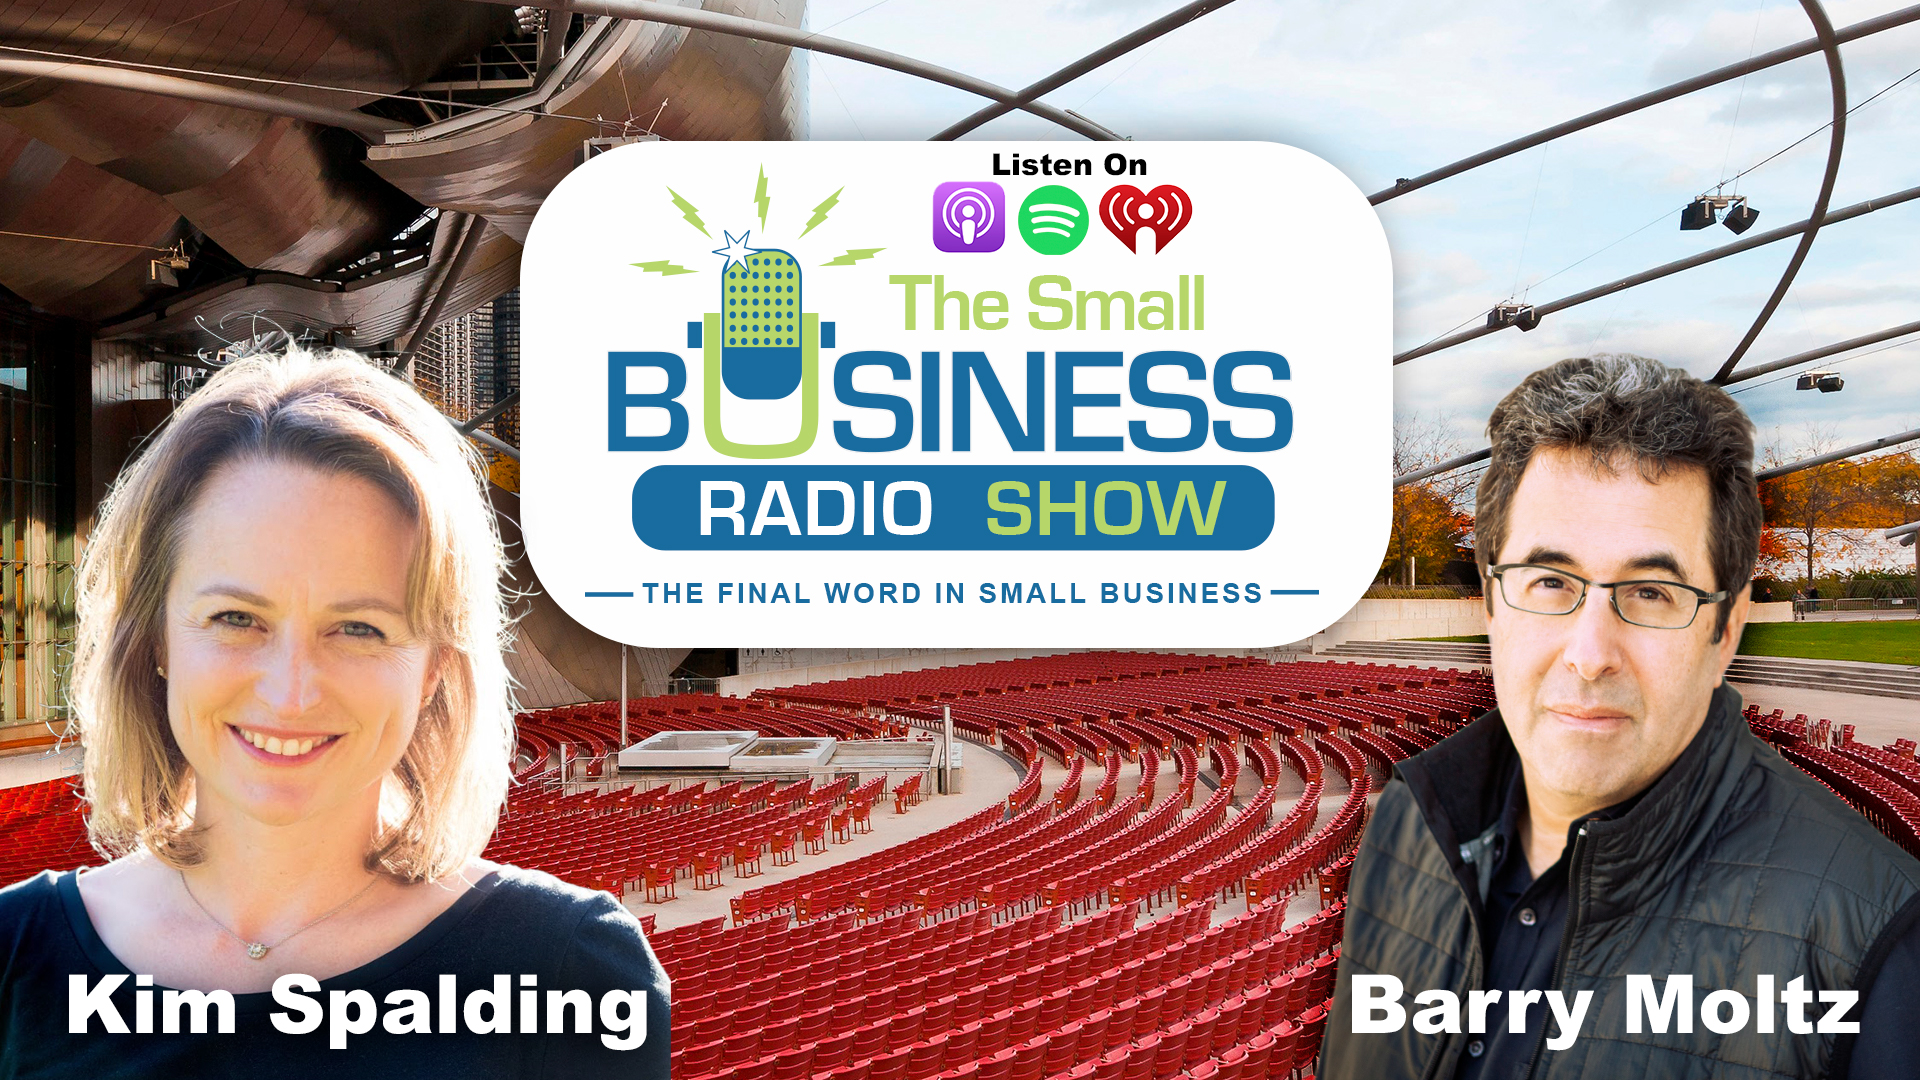 Kim Spalding on The Small Business Radio Show